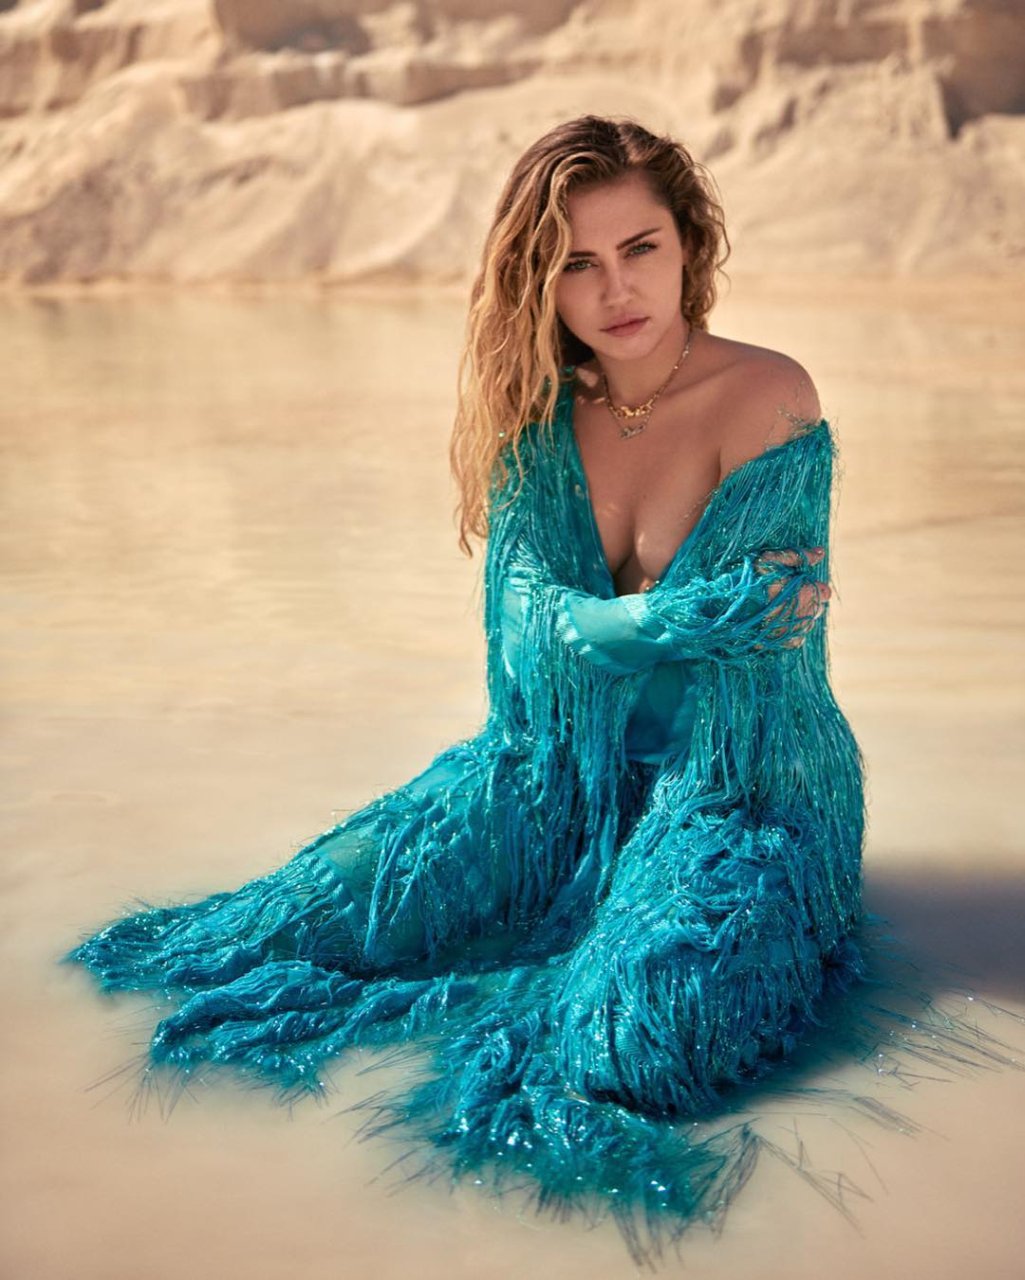 Miley Cyrus Nude And Sexy Vanity Fair Magazine March 2019